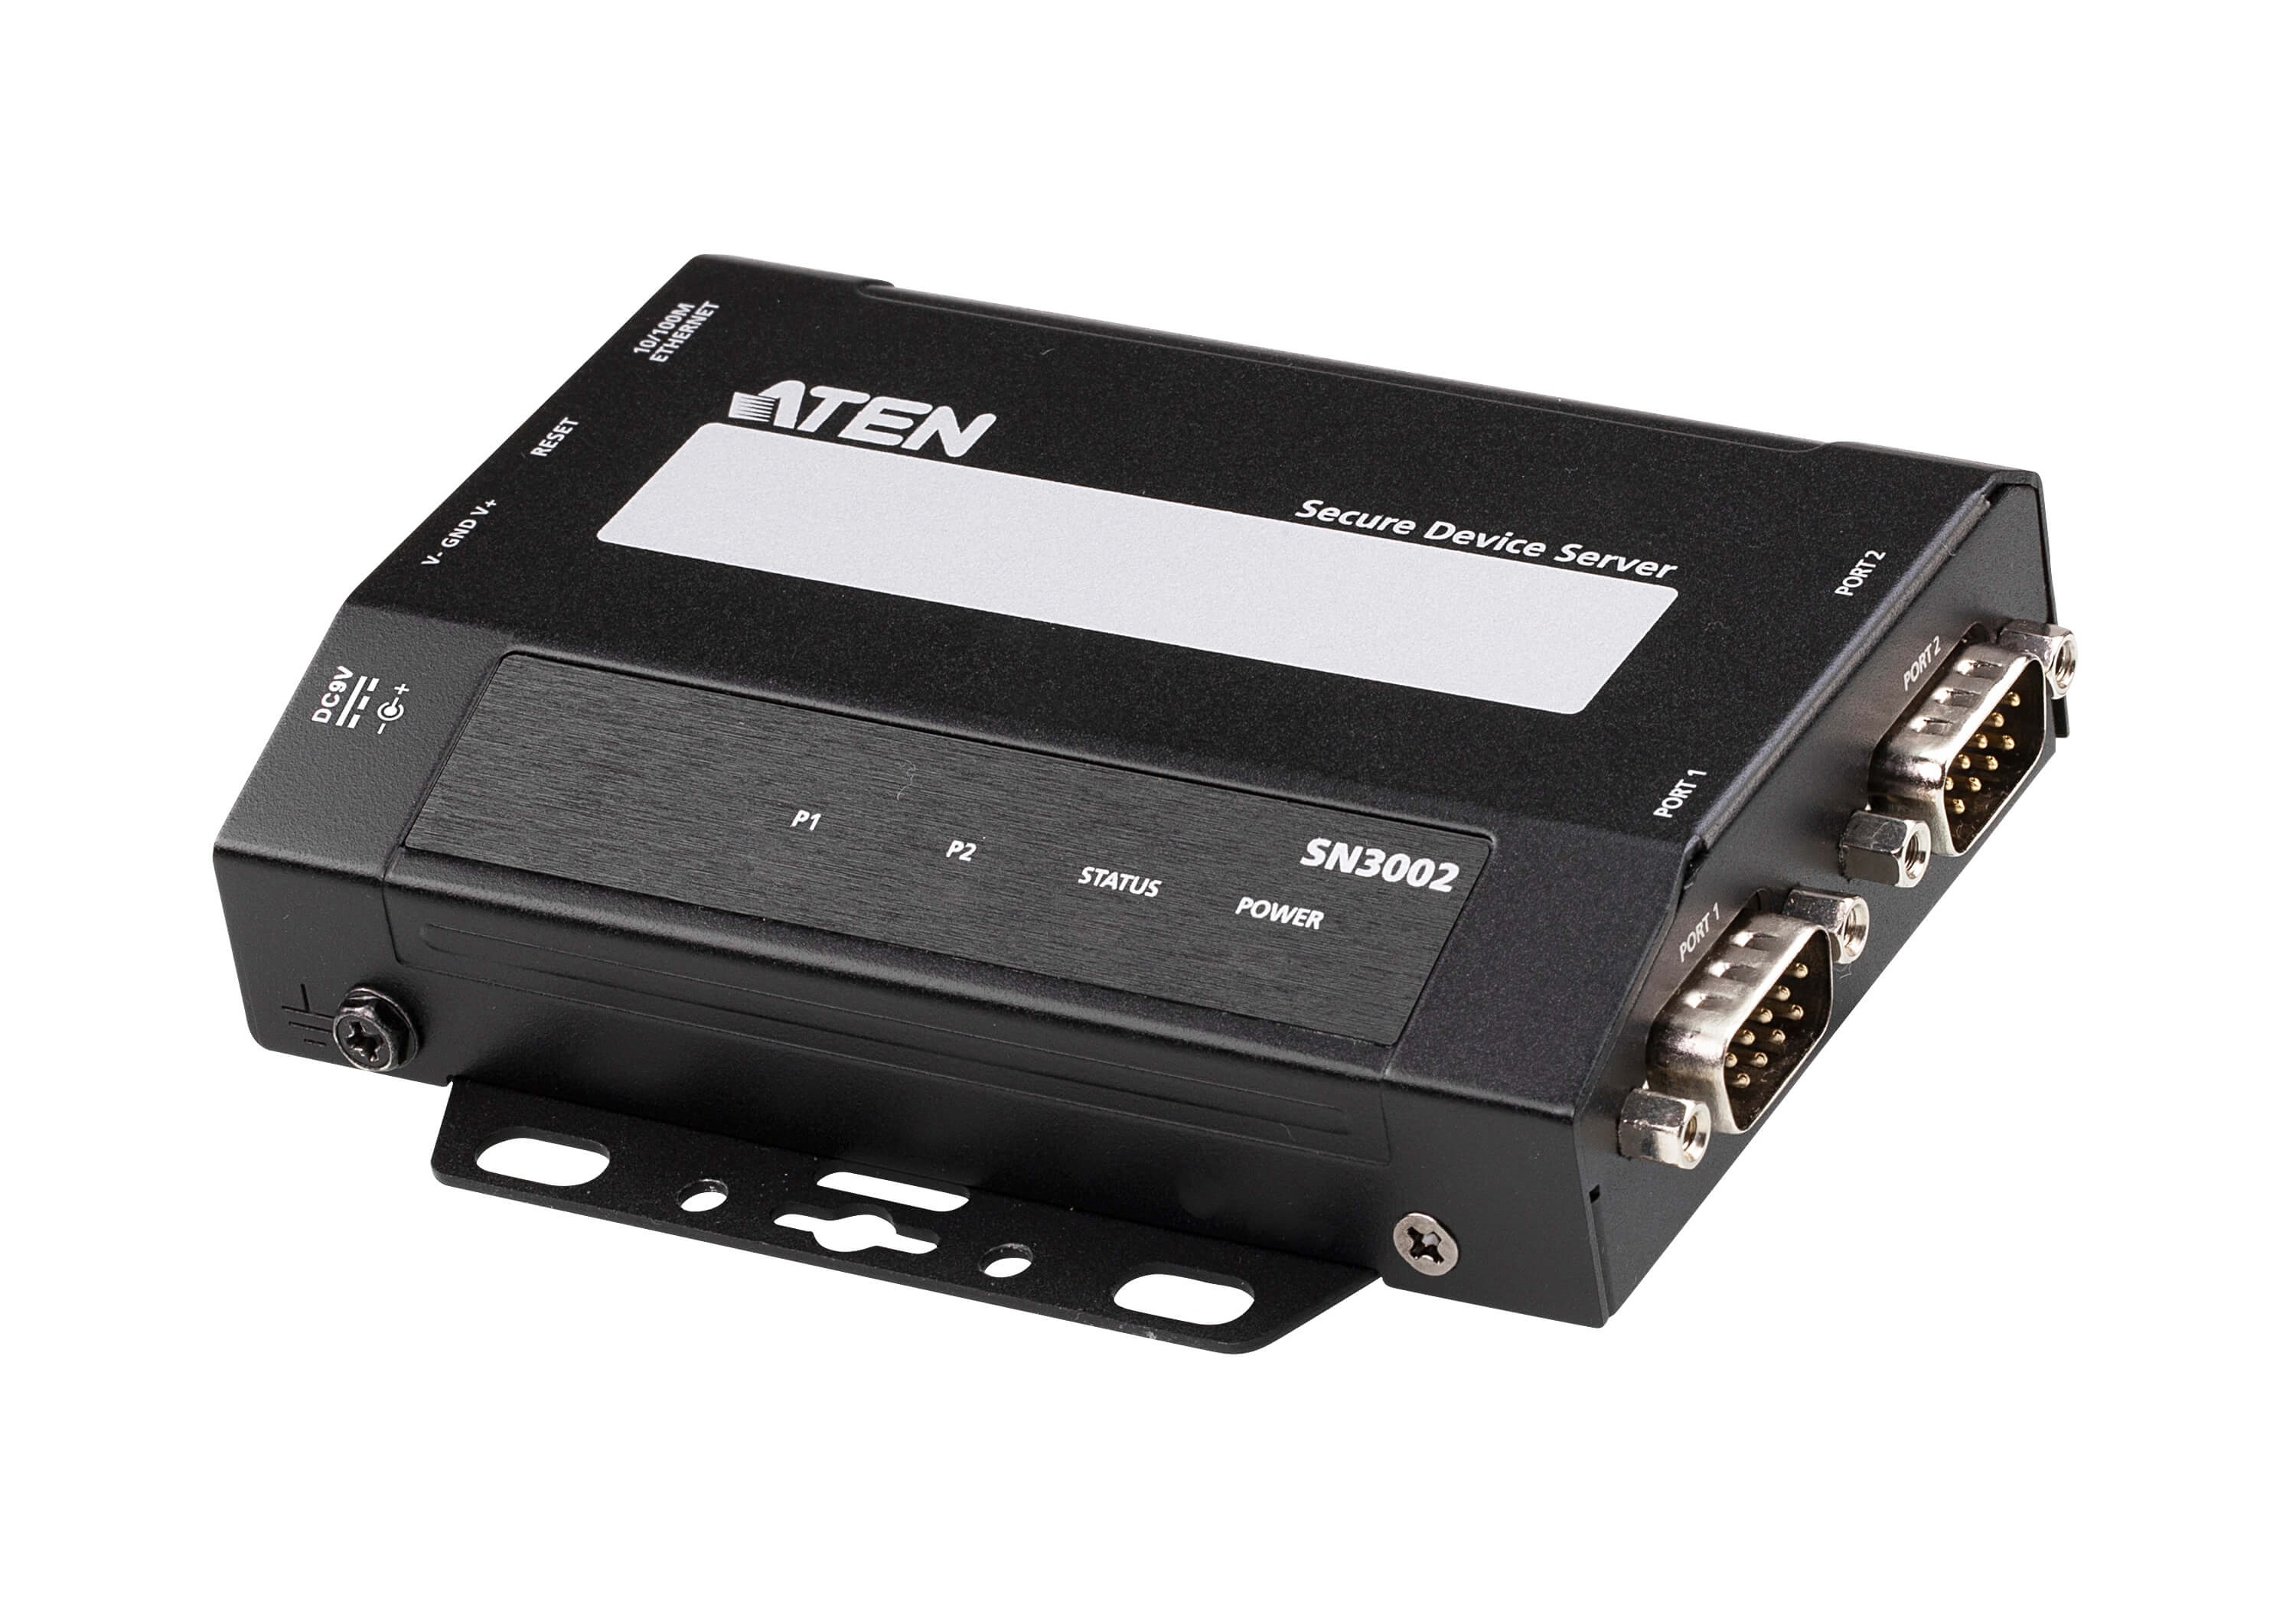 Aten SN3002 2-Port RS-232 Secure Device Server